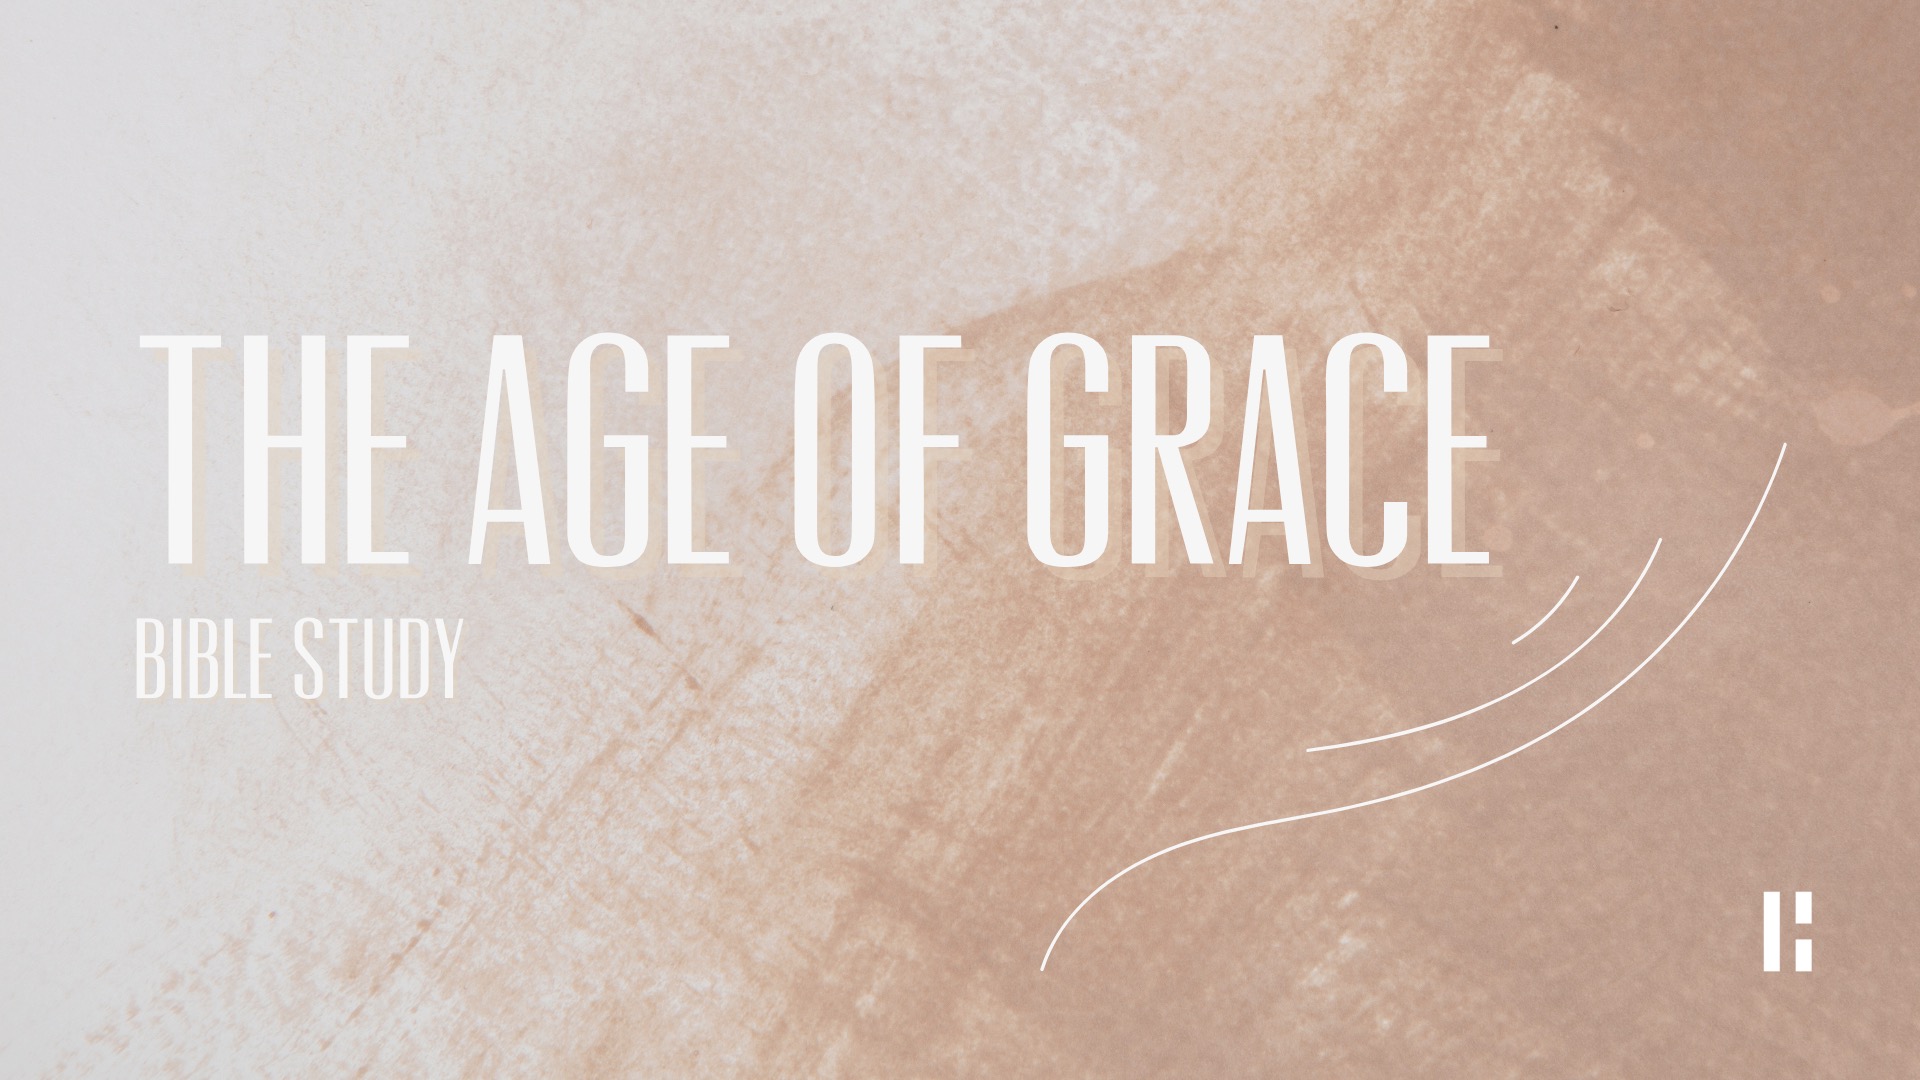 The Age of Grace